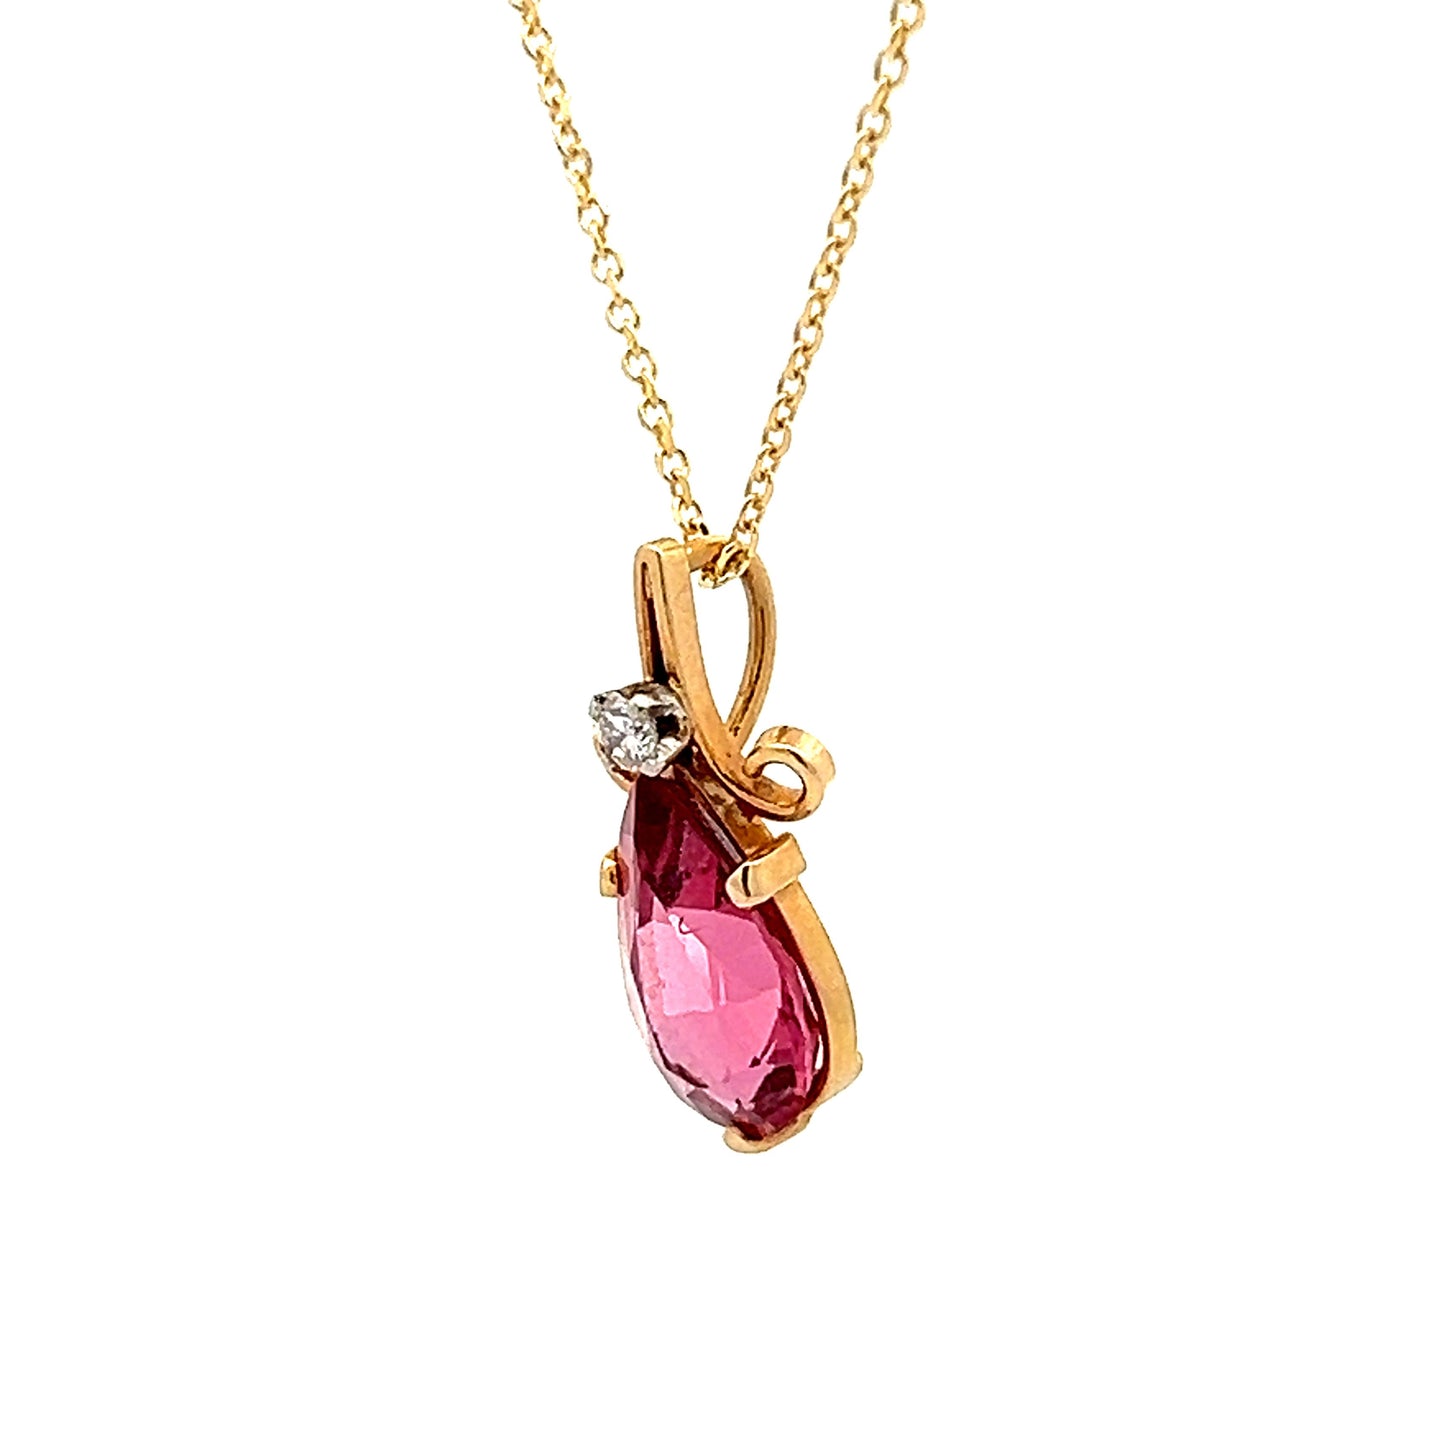 Pear Cut Pink Tourmaline Pendant Necklace in 14k Yellow Gold